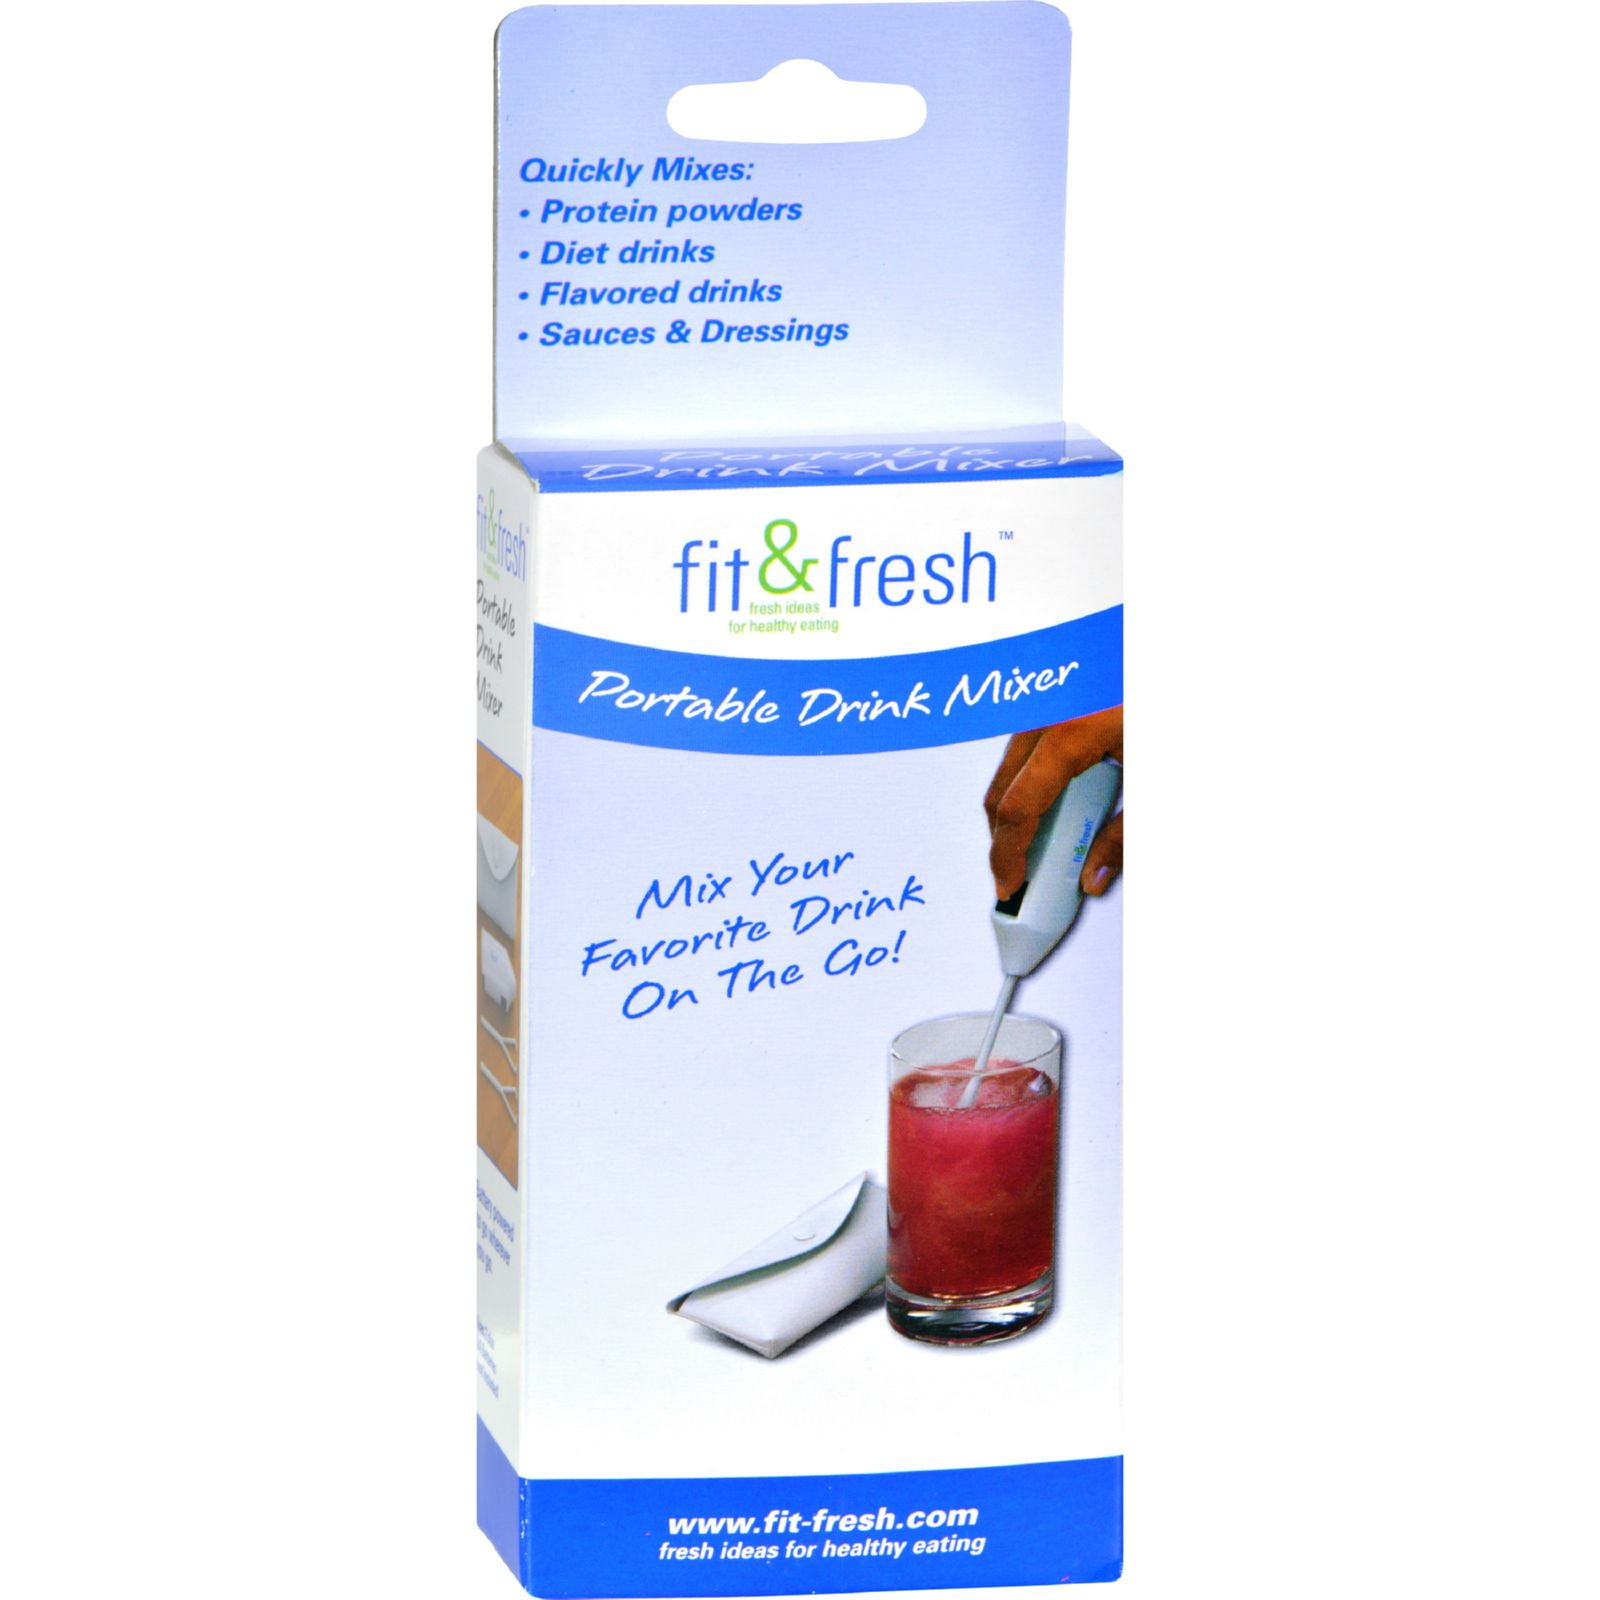 Buy Fit And Fresh Portable Drink Mixer 1 Unit products at